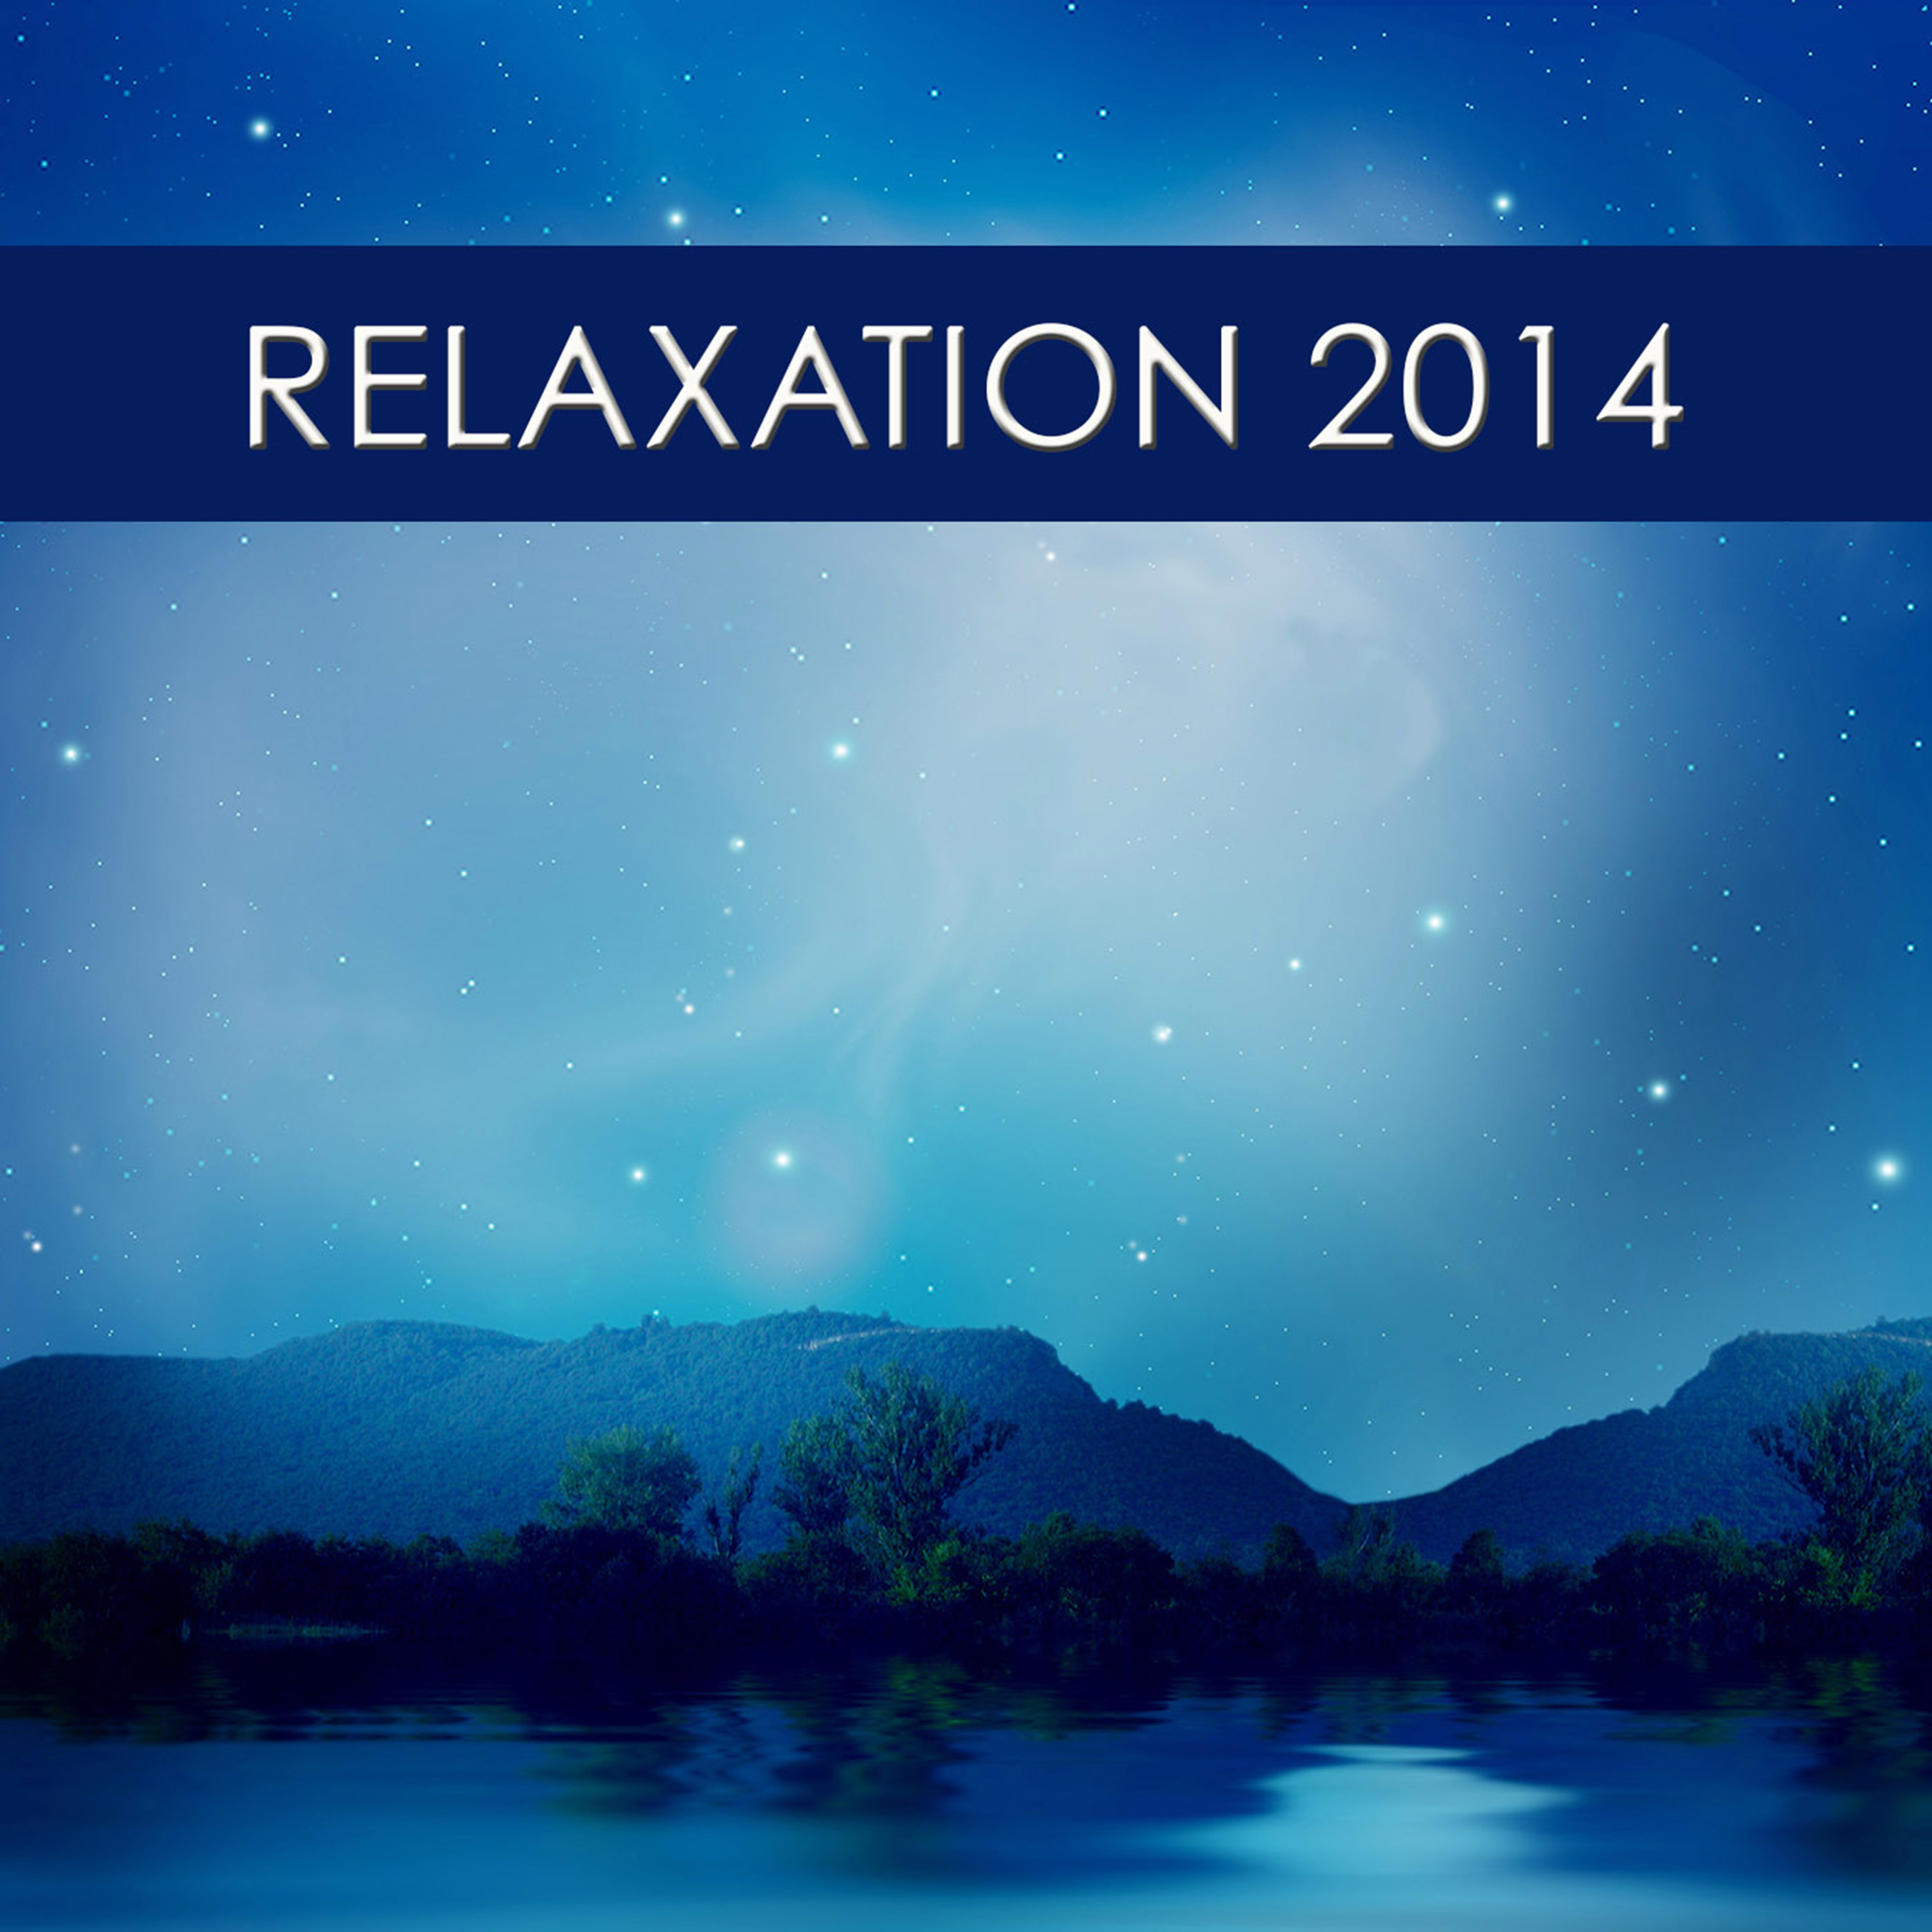 Relaxation 2014 - Sleep Music Lullabies & New Relaxation Music All Years Long